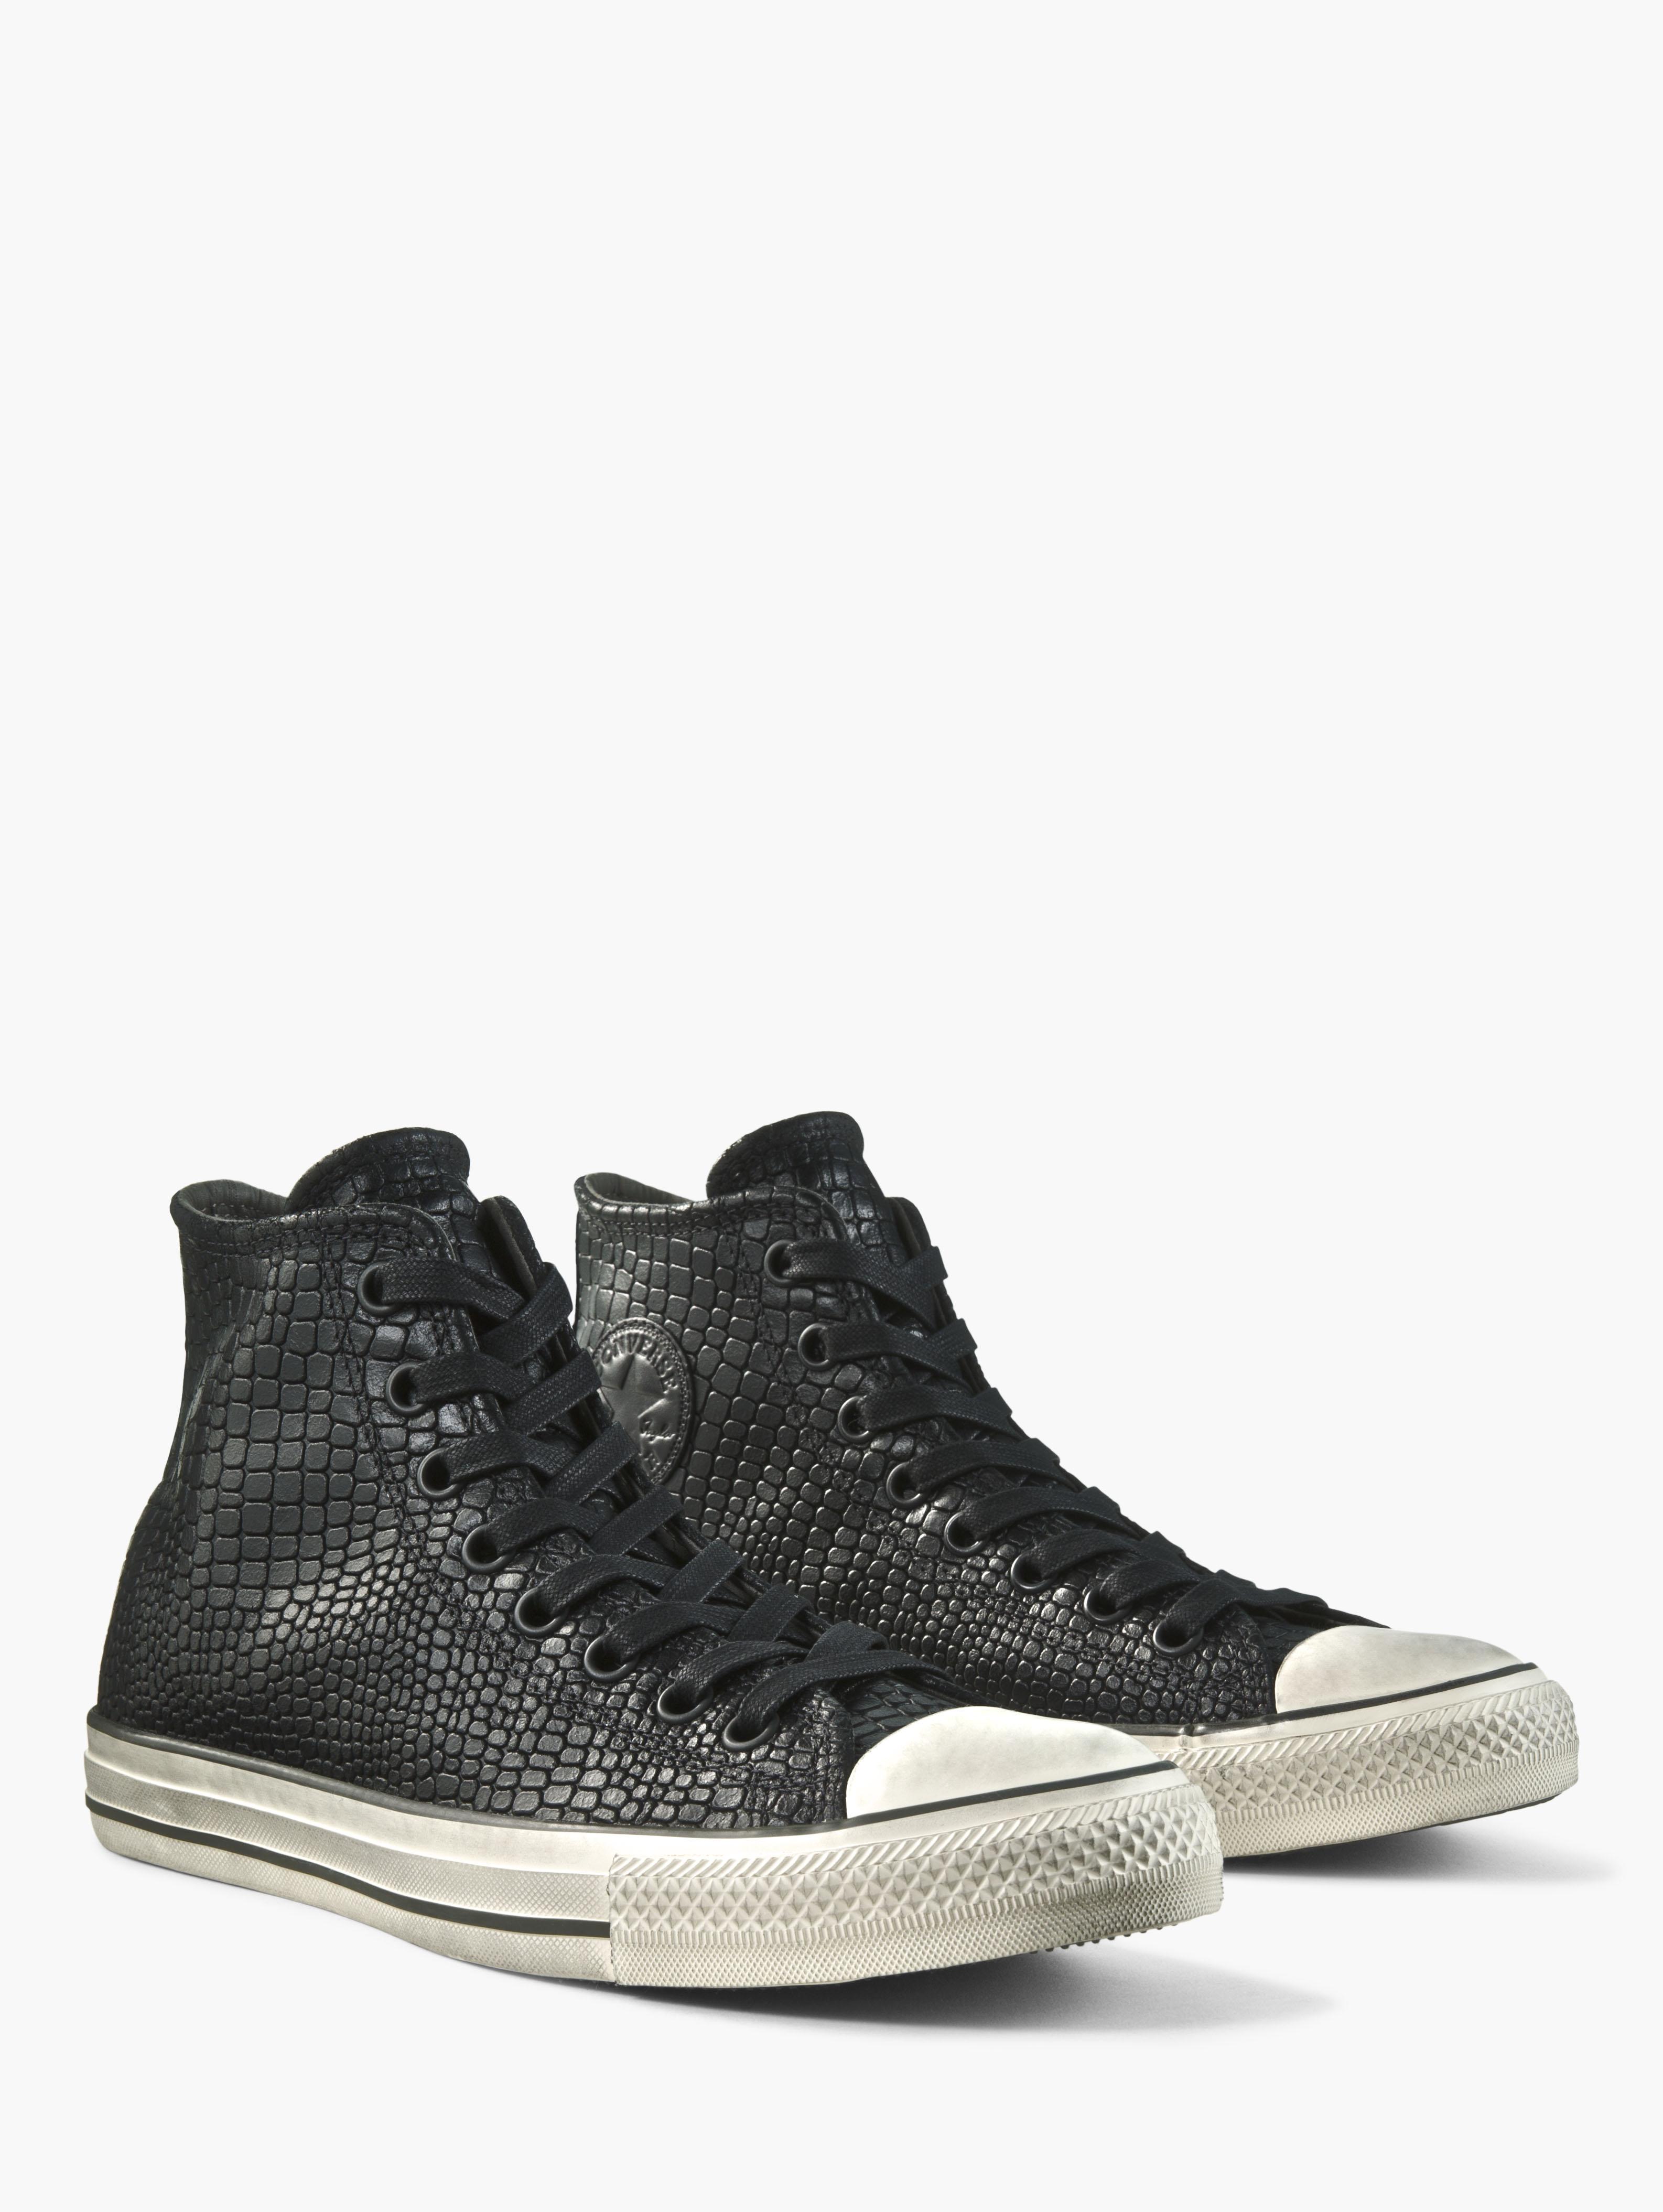 Reptile Embossed Chuck Taylor High Top image number 1